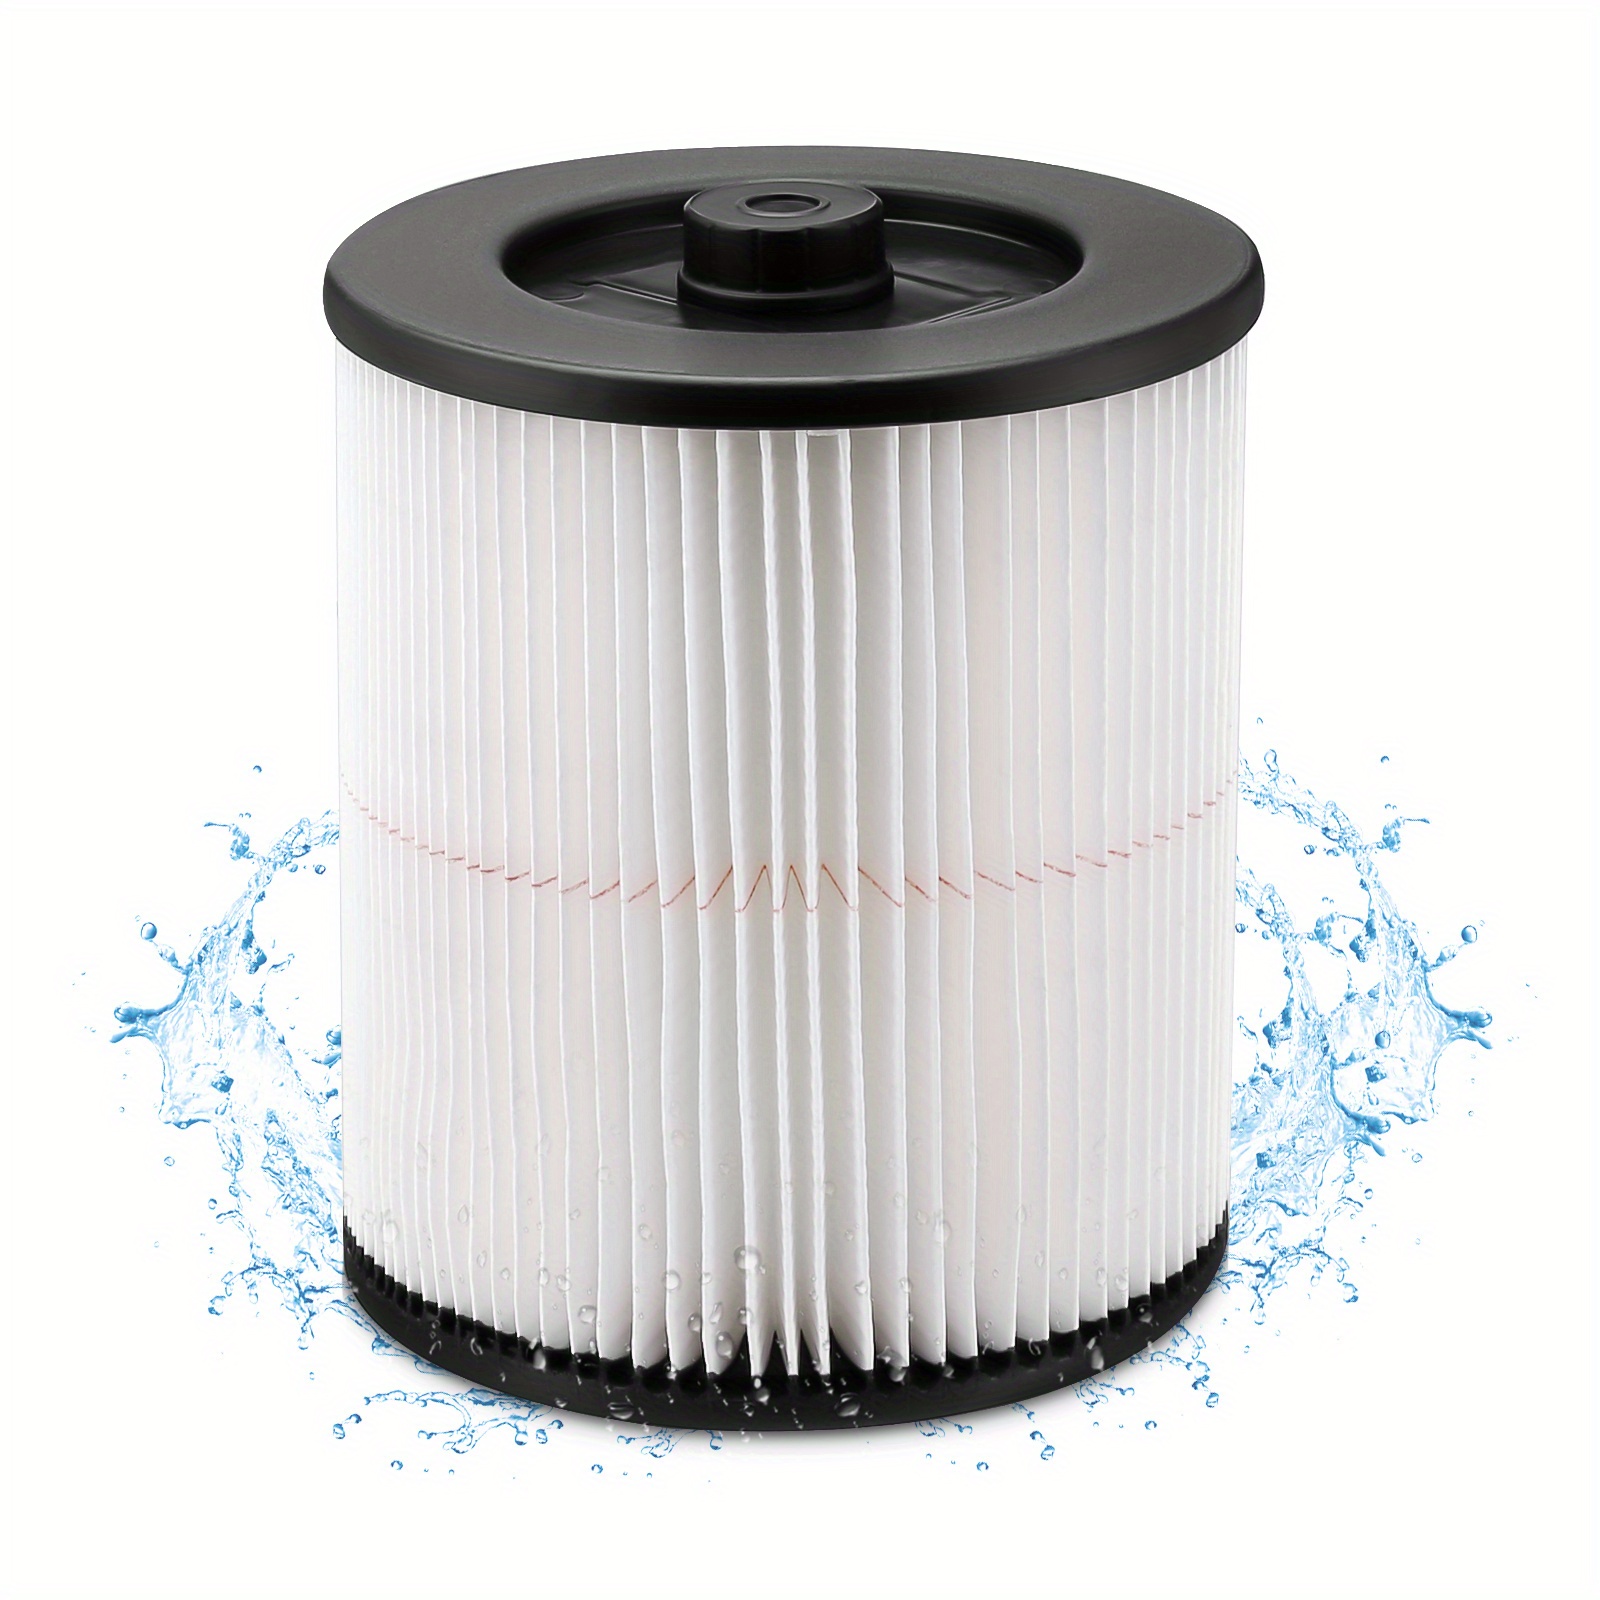 

1pcs 17816 Replacement Cartridge Filter Compatible With Craftsman Fits 6/8/9/12/16/32 Gallon Large Wet Dry Shop Vacs Replace Part# 9-17816